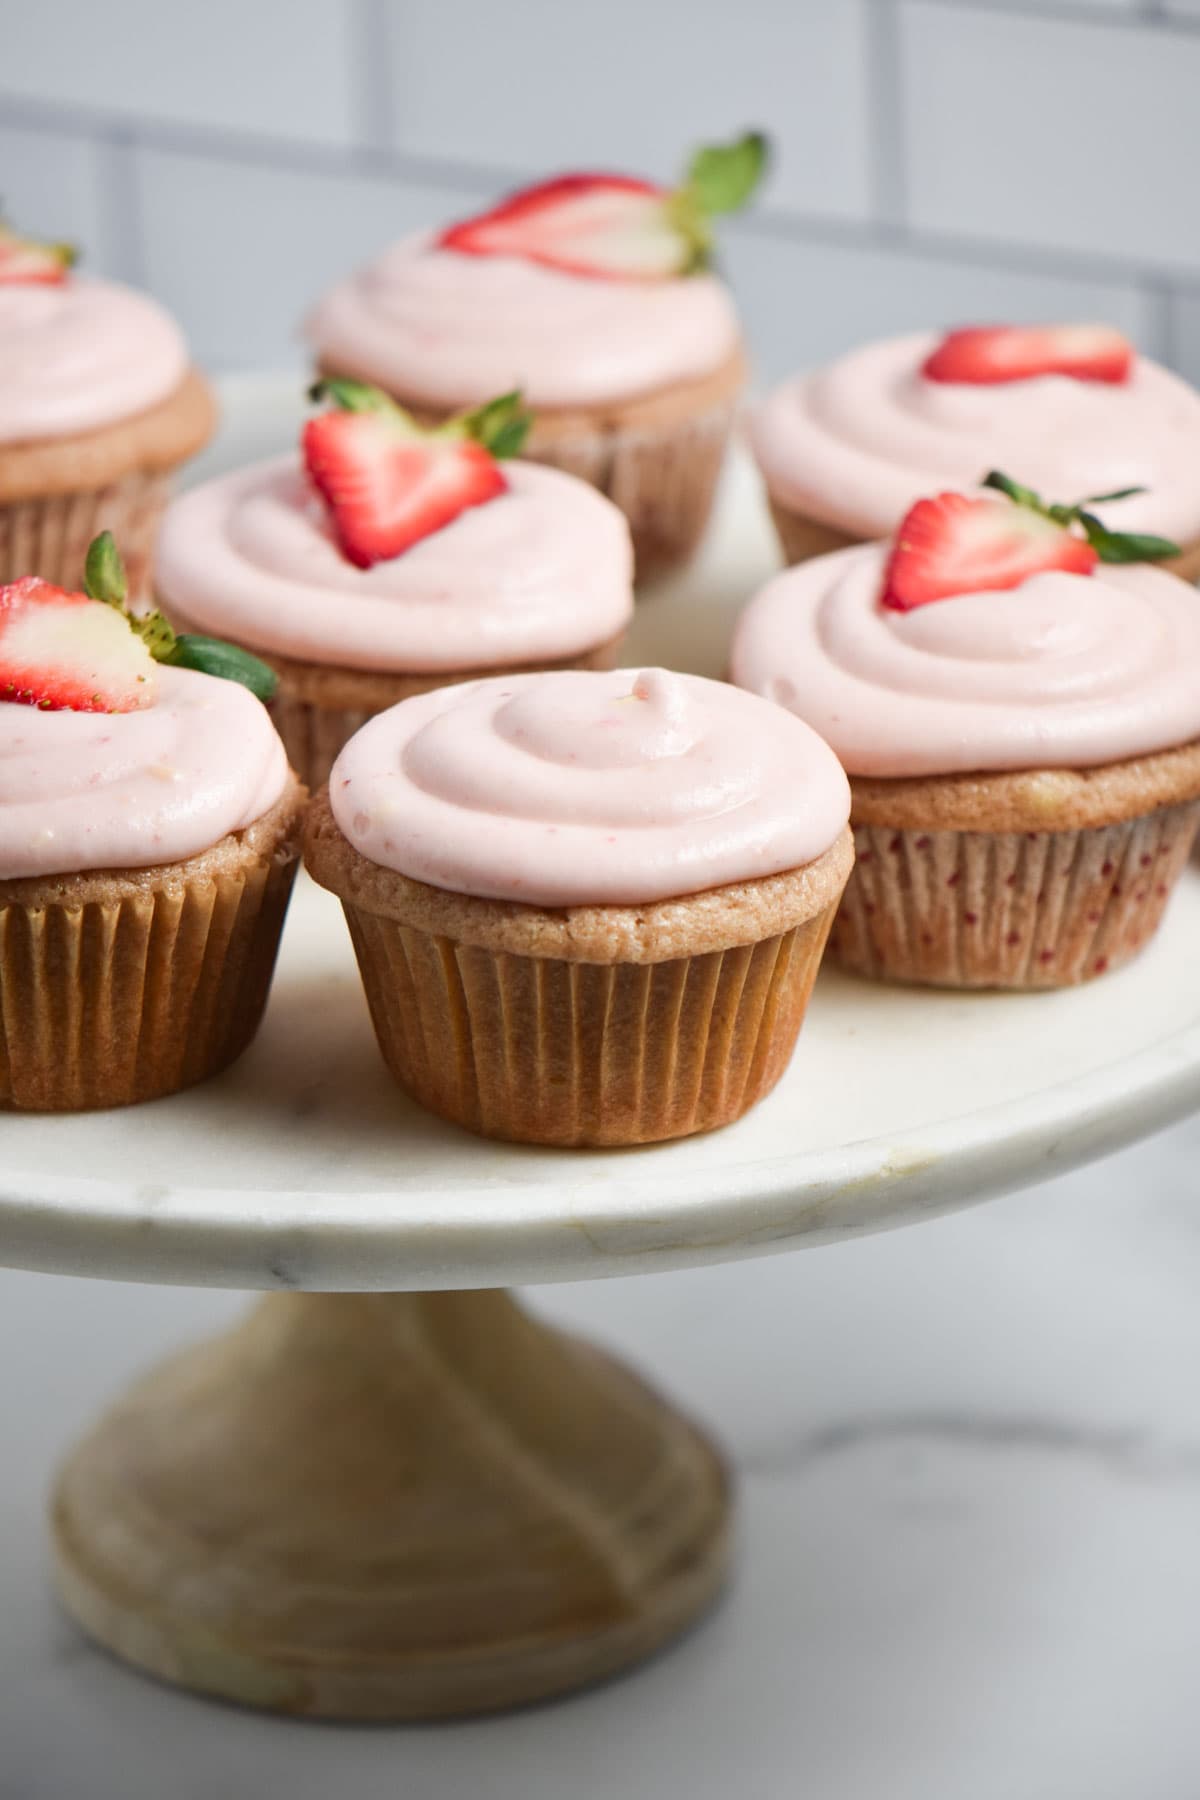 Cream cheese frosting on a cupcake, some being topped with a fresh strawberry slice.